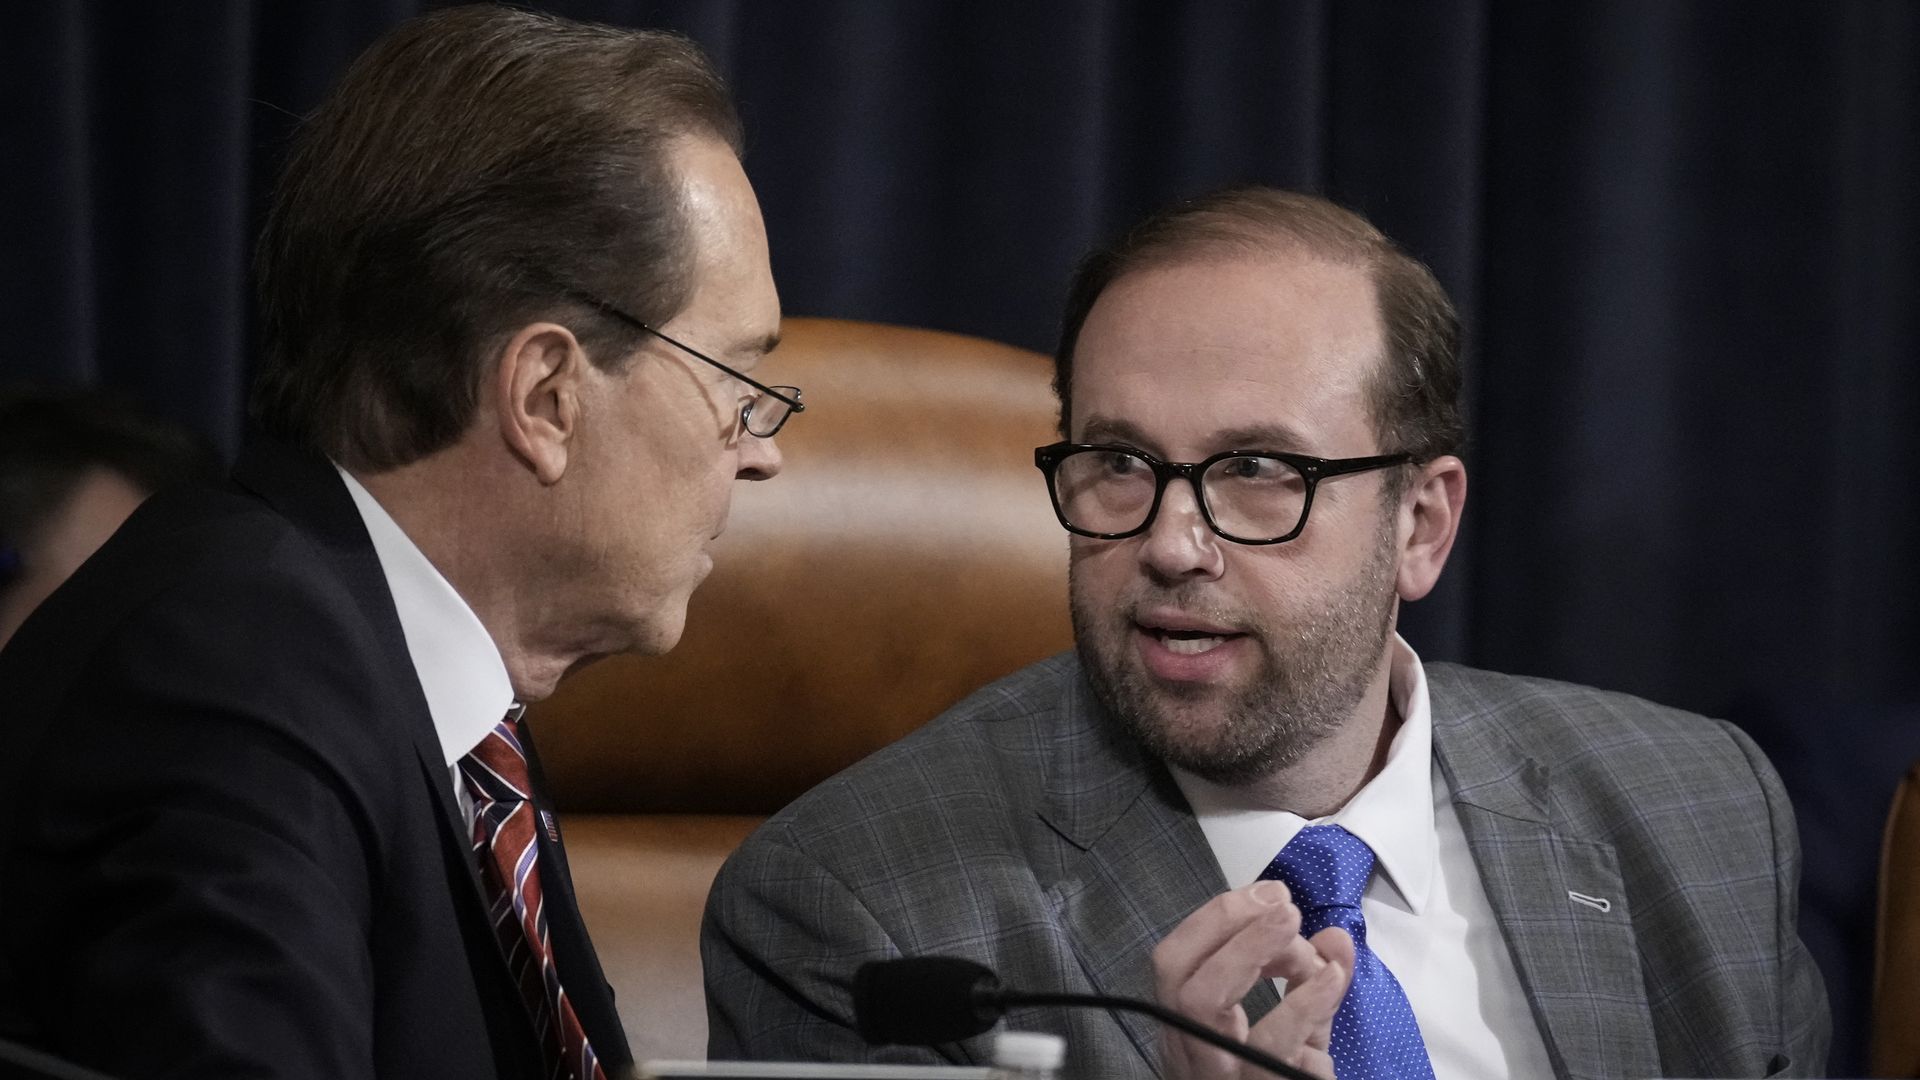 Rep. Vern Buchanan talks with Ways and Means committee chairman Jason Smith during a previous Committee hearing in March. (Photo by Drew Angerer/Getty Images)